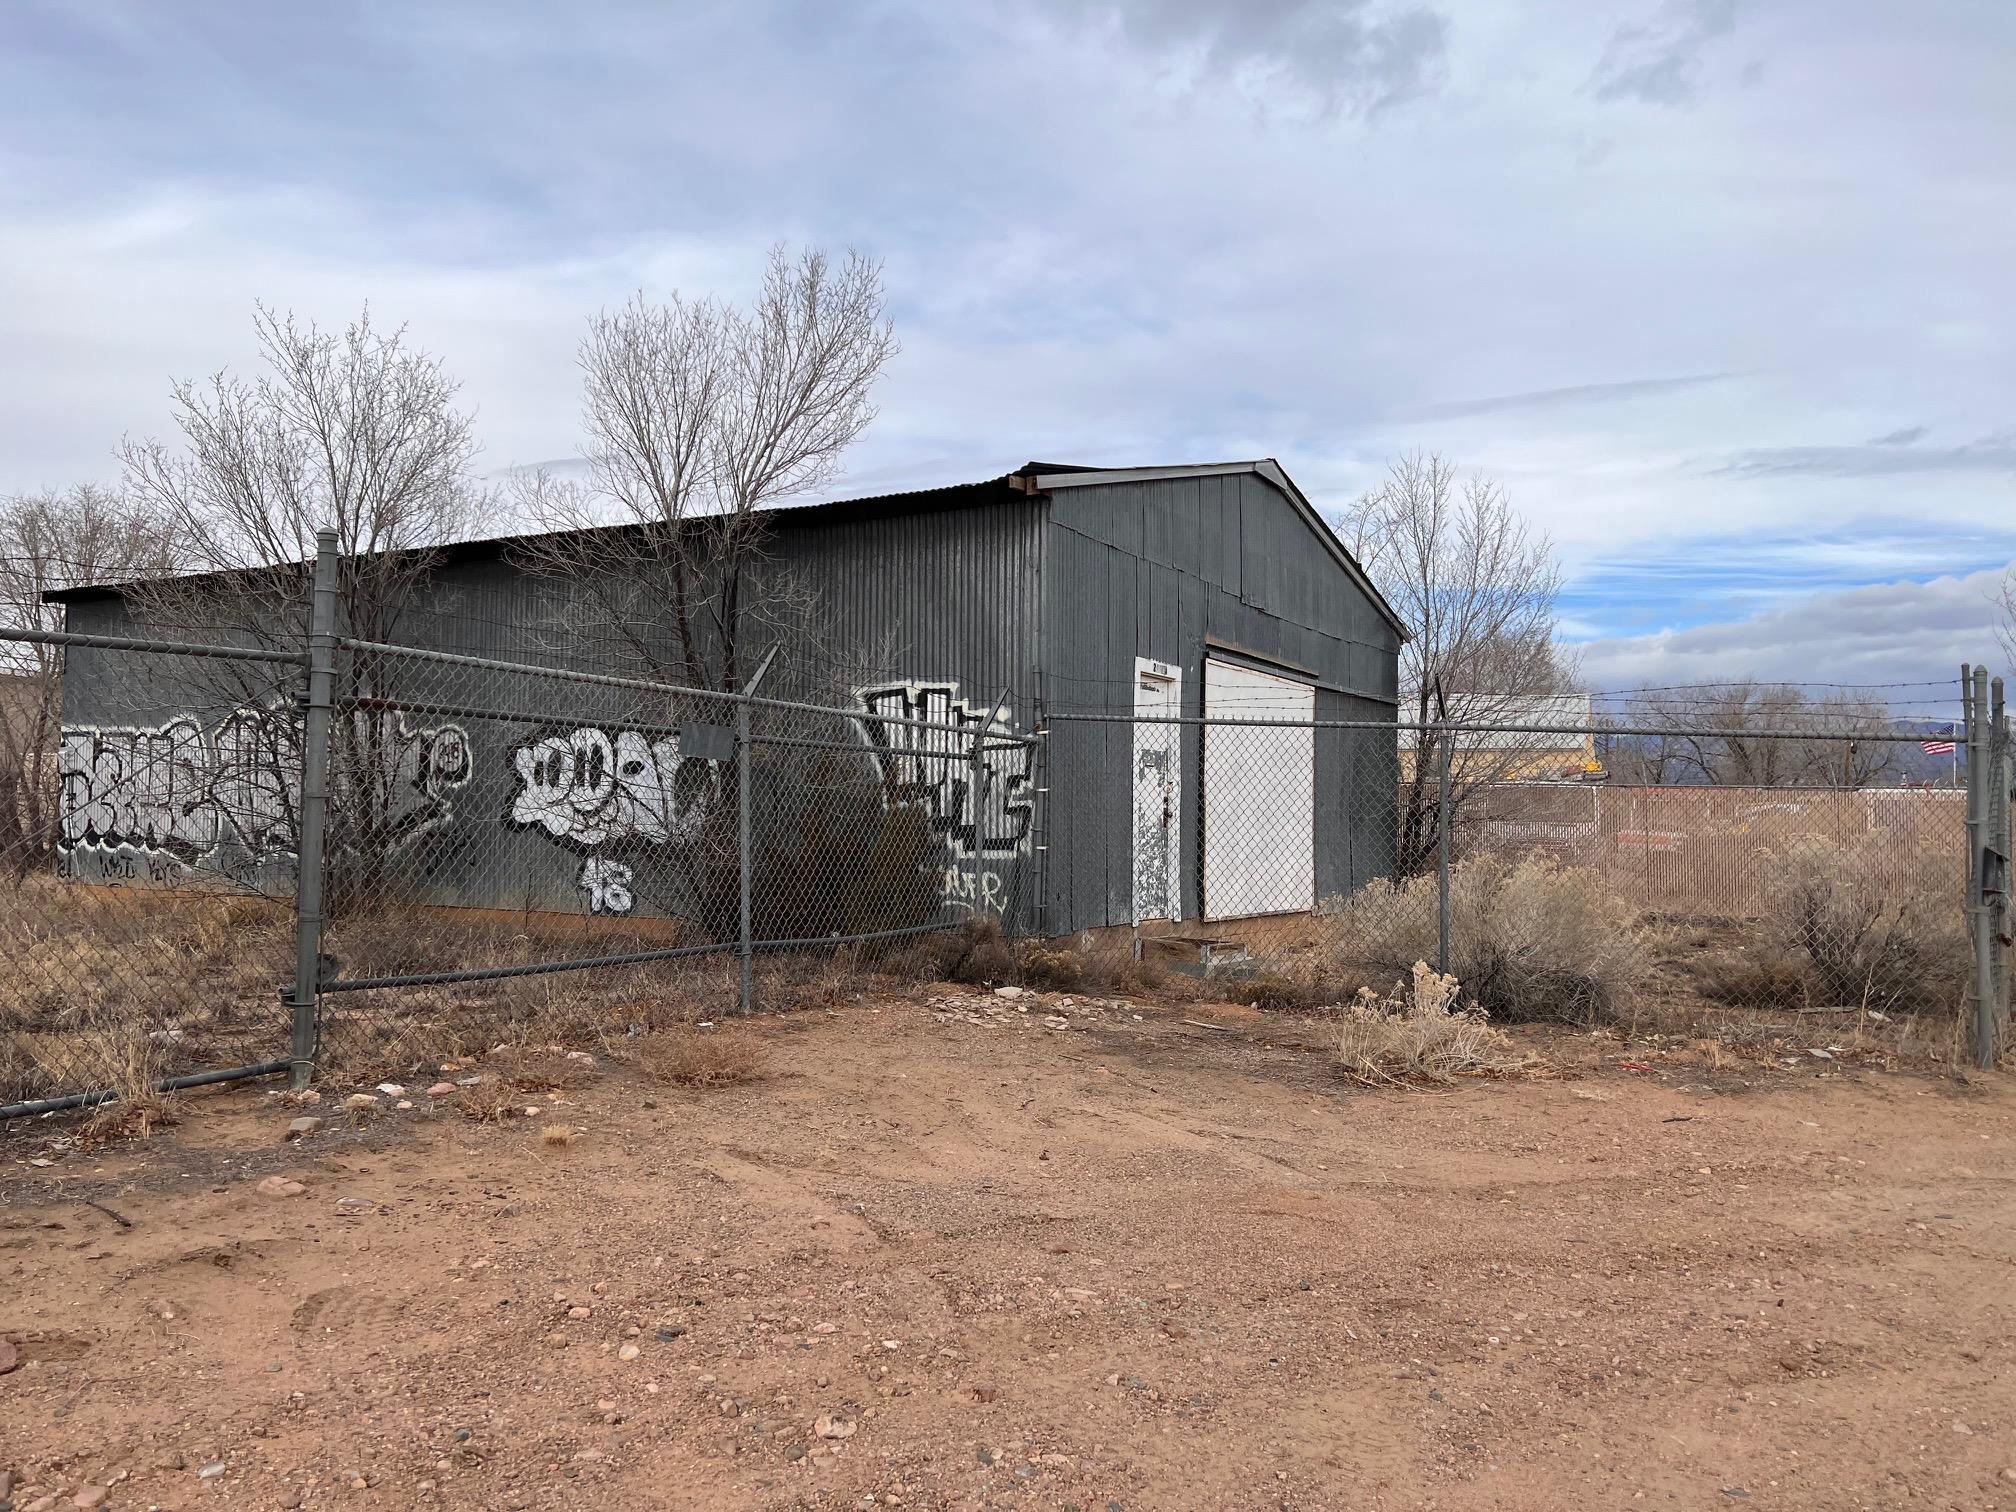 2885 INDUSTRIAL, Santa Fe, New Mexico 87507, ,Land,For Sale,2885 INDUSTRIAL,202200162